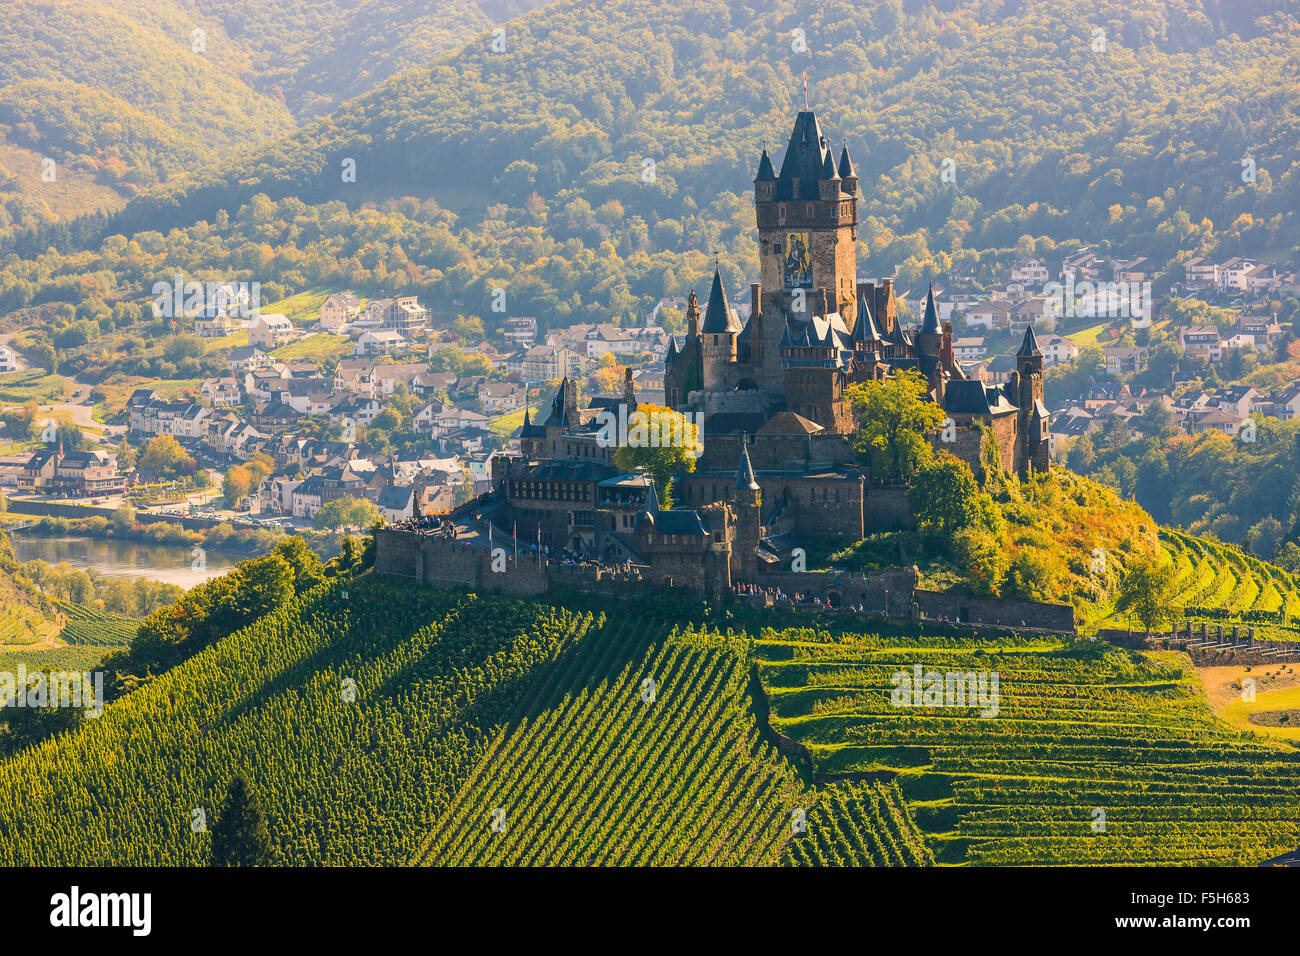 Reichsburg Cochem Castle is more than a castle. It is the largest hill-castle on the Mosel river, Germany. Stock Photo